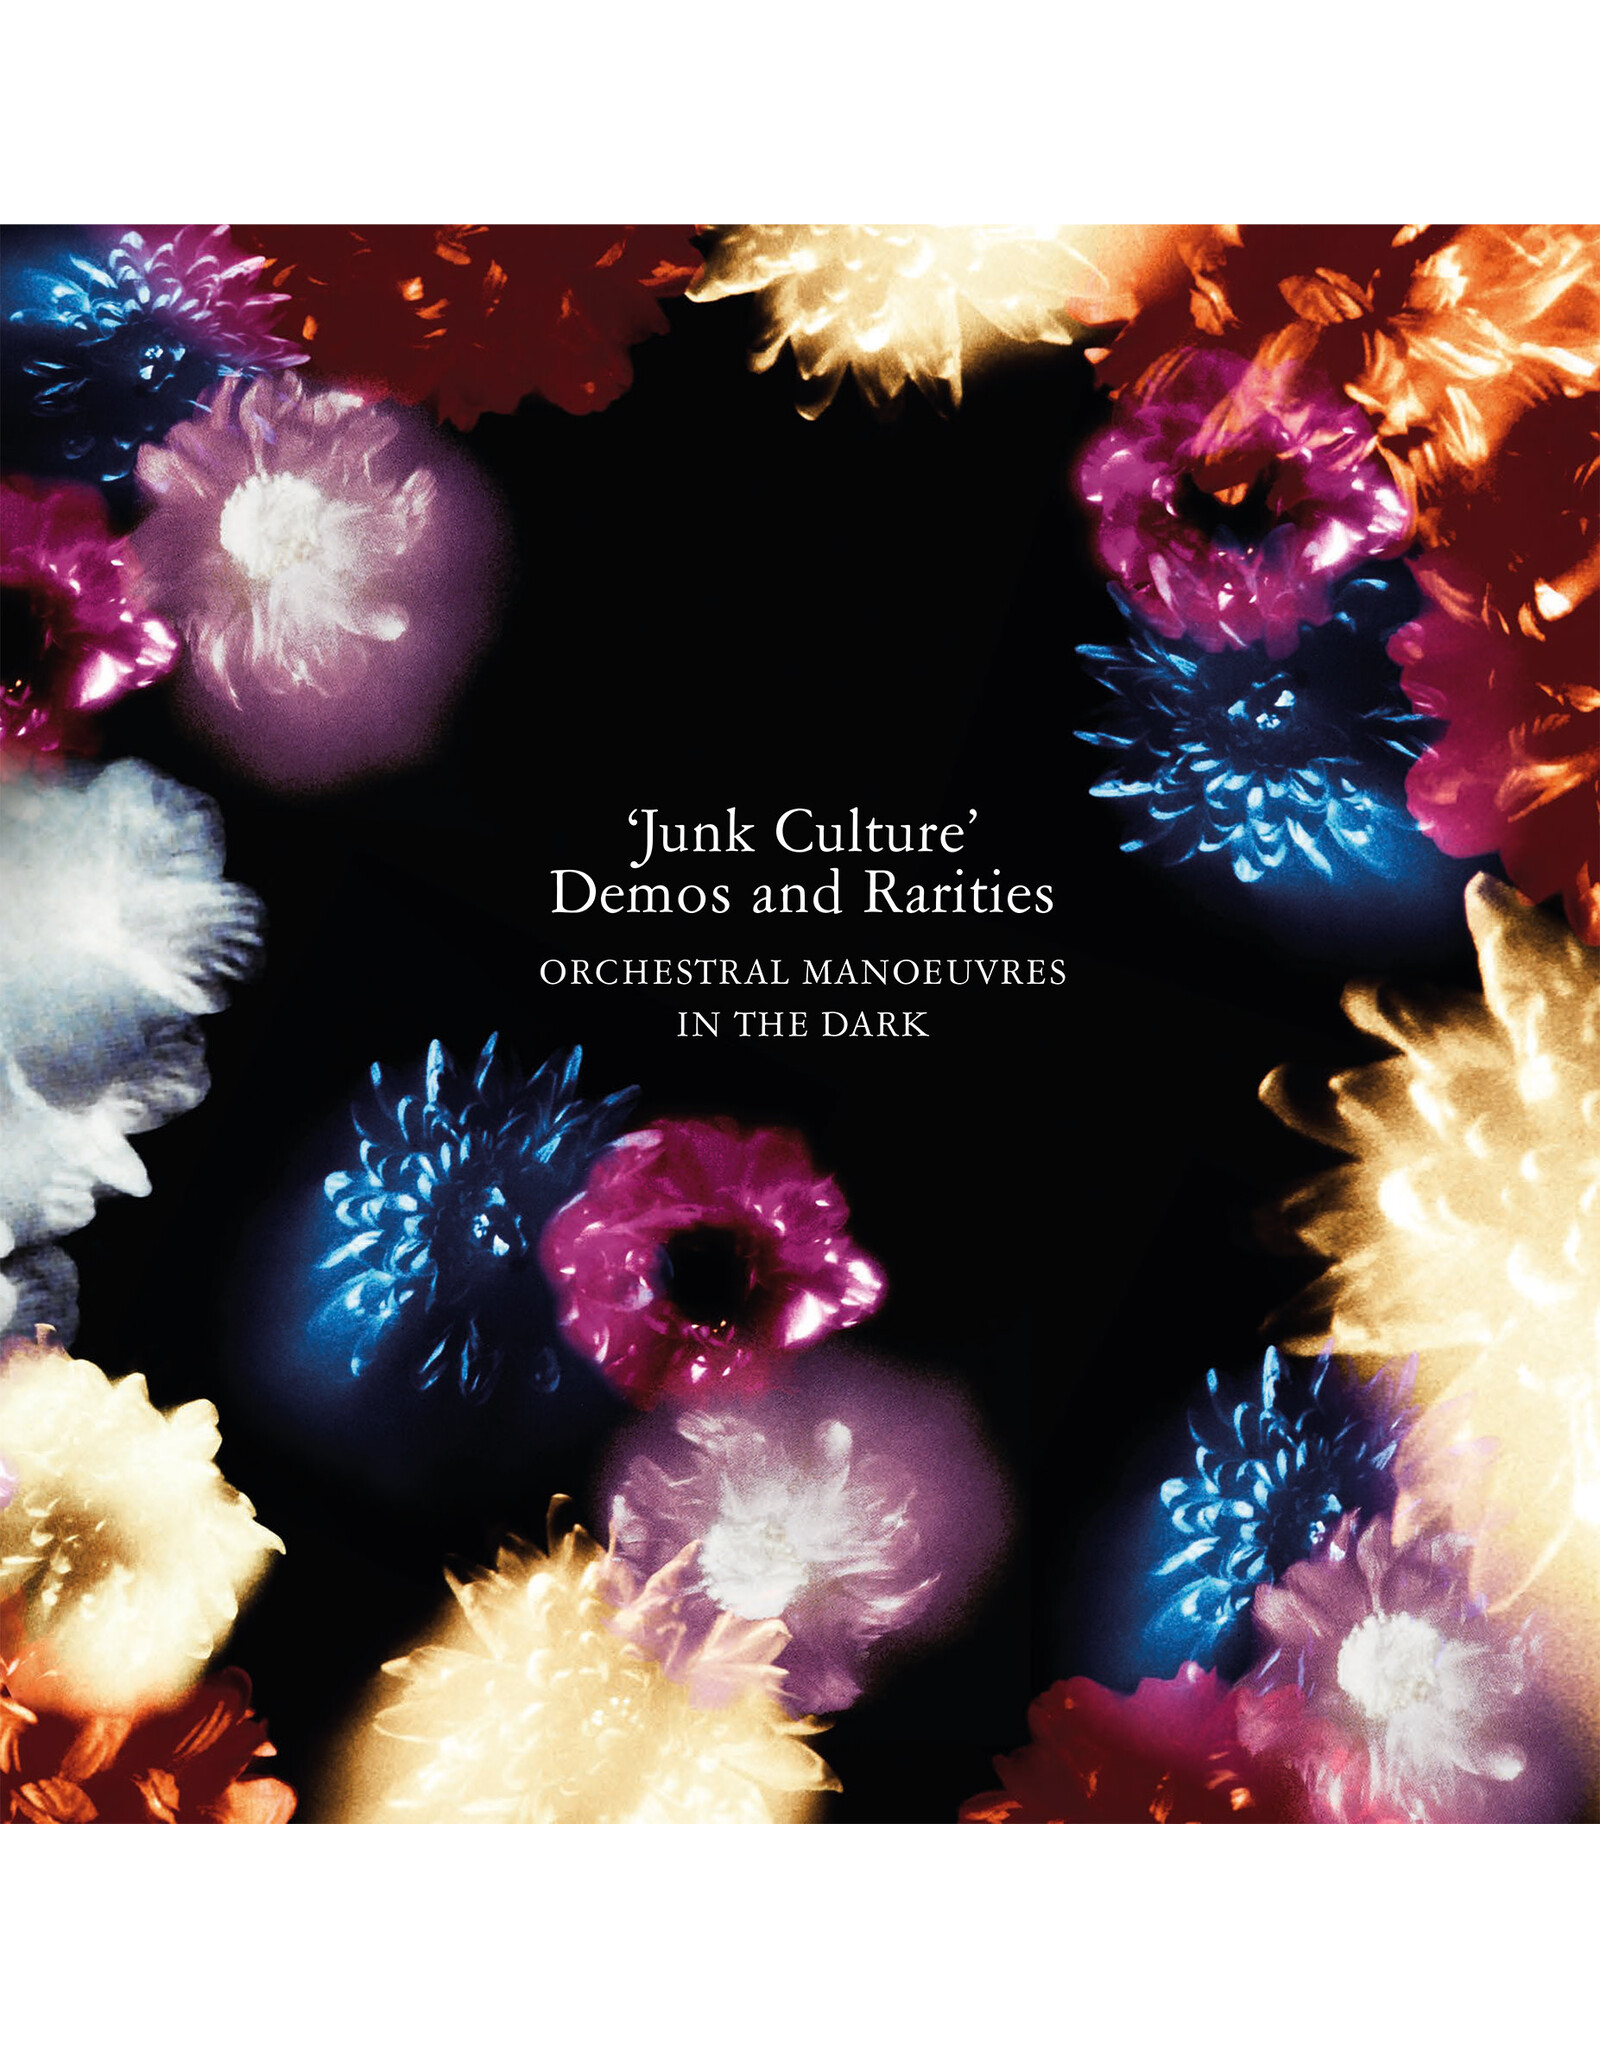 Orchestral Manoeuvres In The Dark - Junk Culture: Demos and Rarities (Record Store Day)